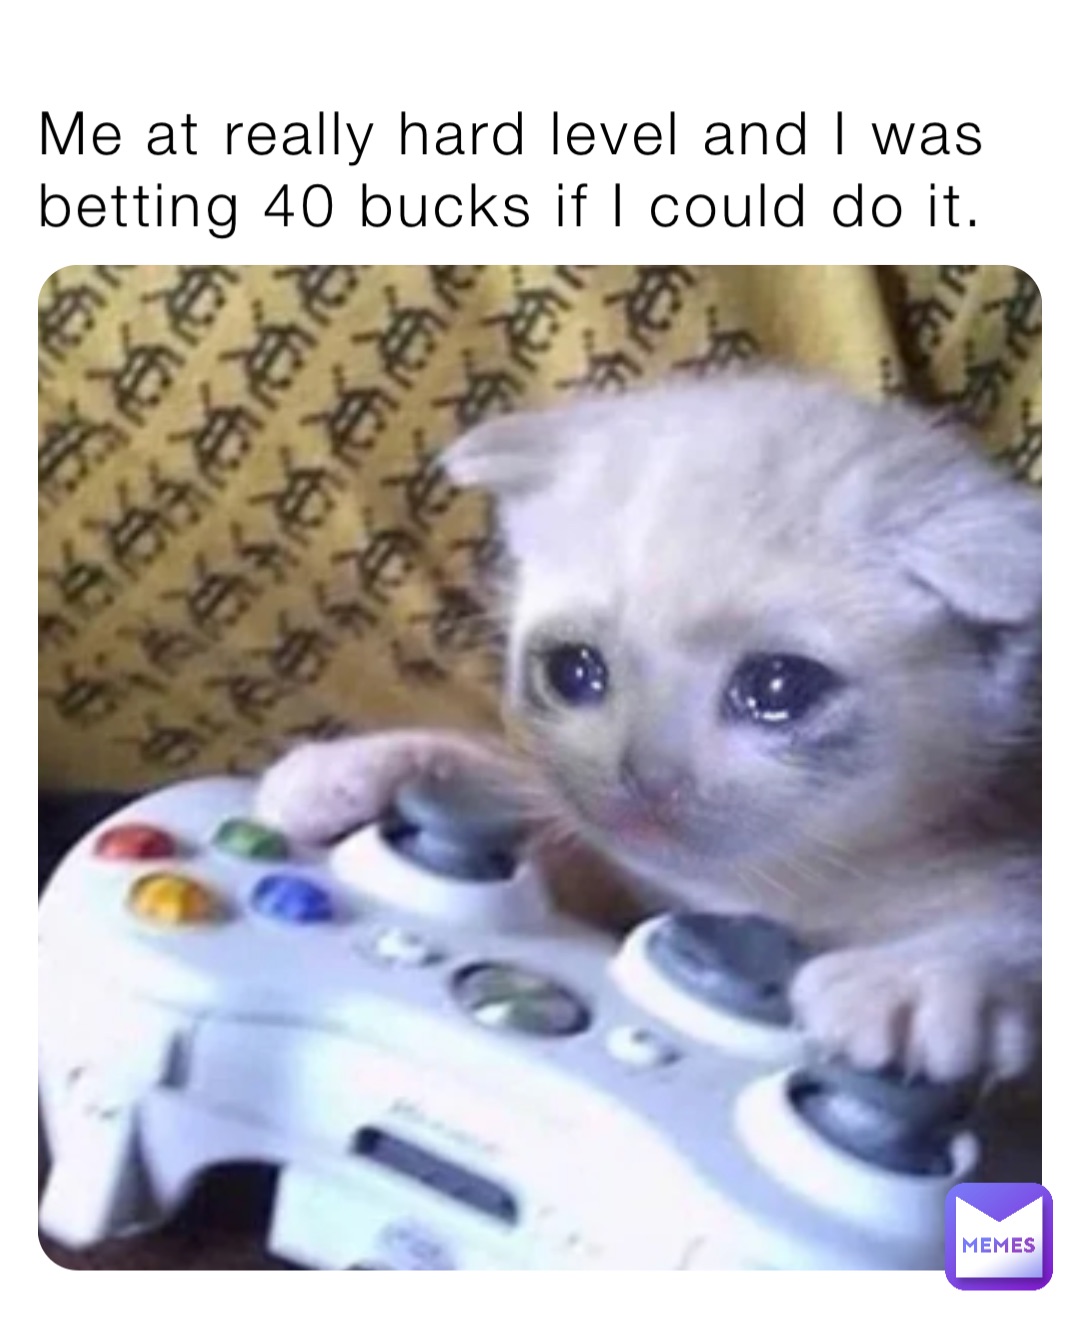 Me at really hard level and I was betting 40 bucks if I could do it.